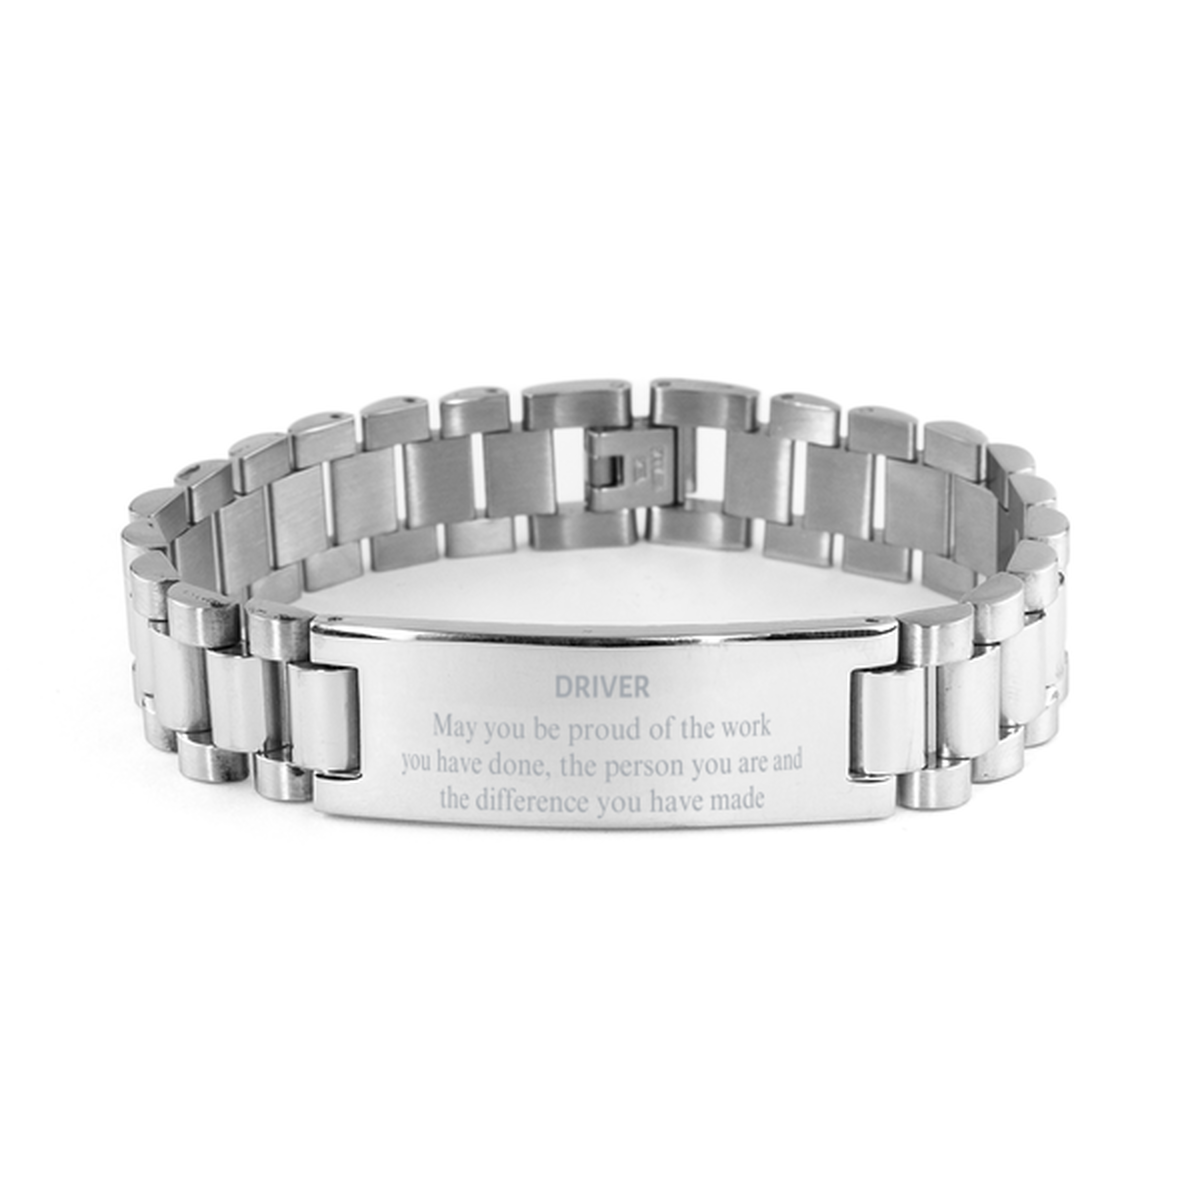 Driver May you be proud of the work you have done, Retirement Driver Ladder Stainless Steel Bracelet for Colleague Appreciation Gifts Amazing for Driver